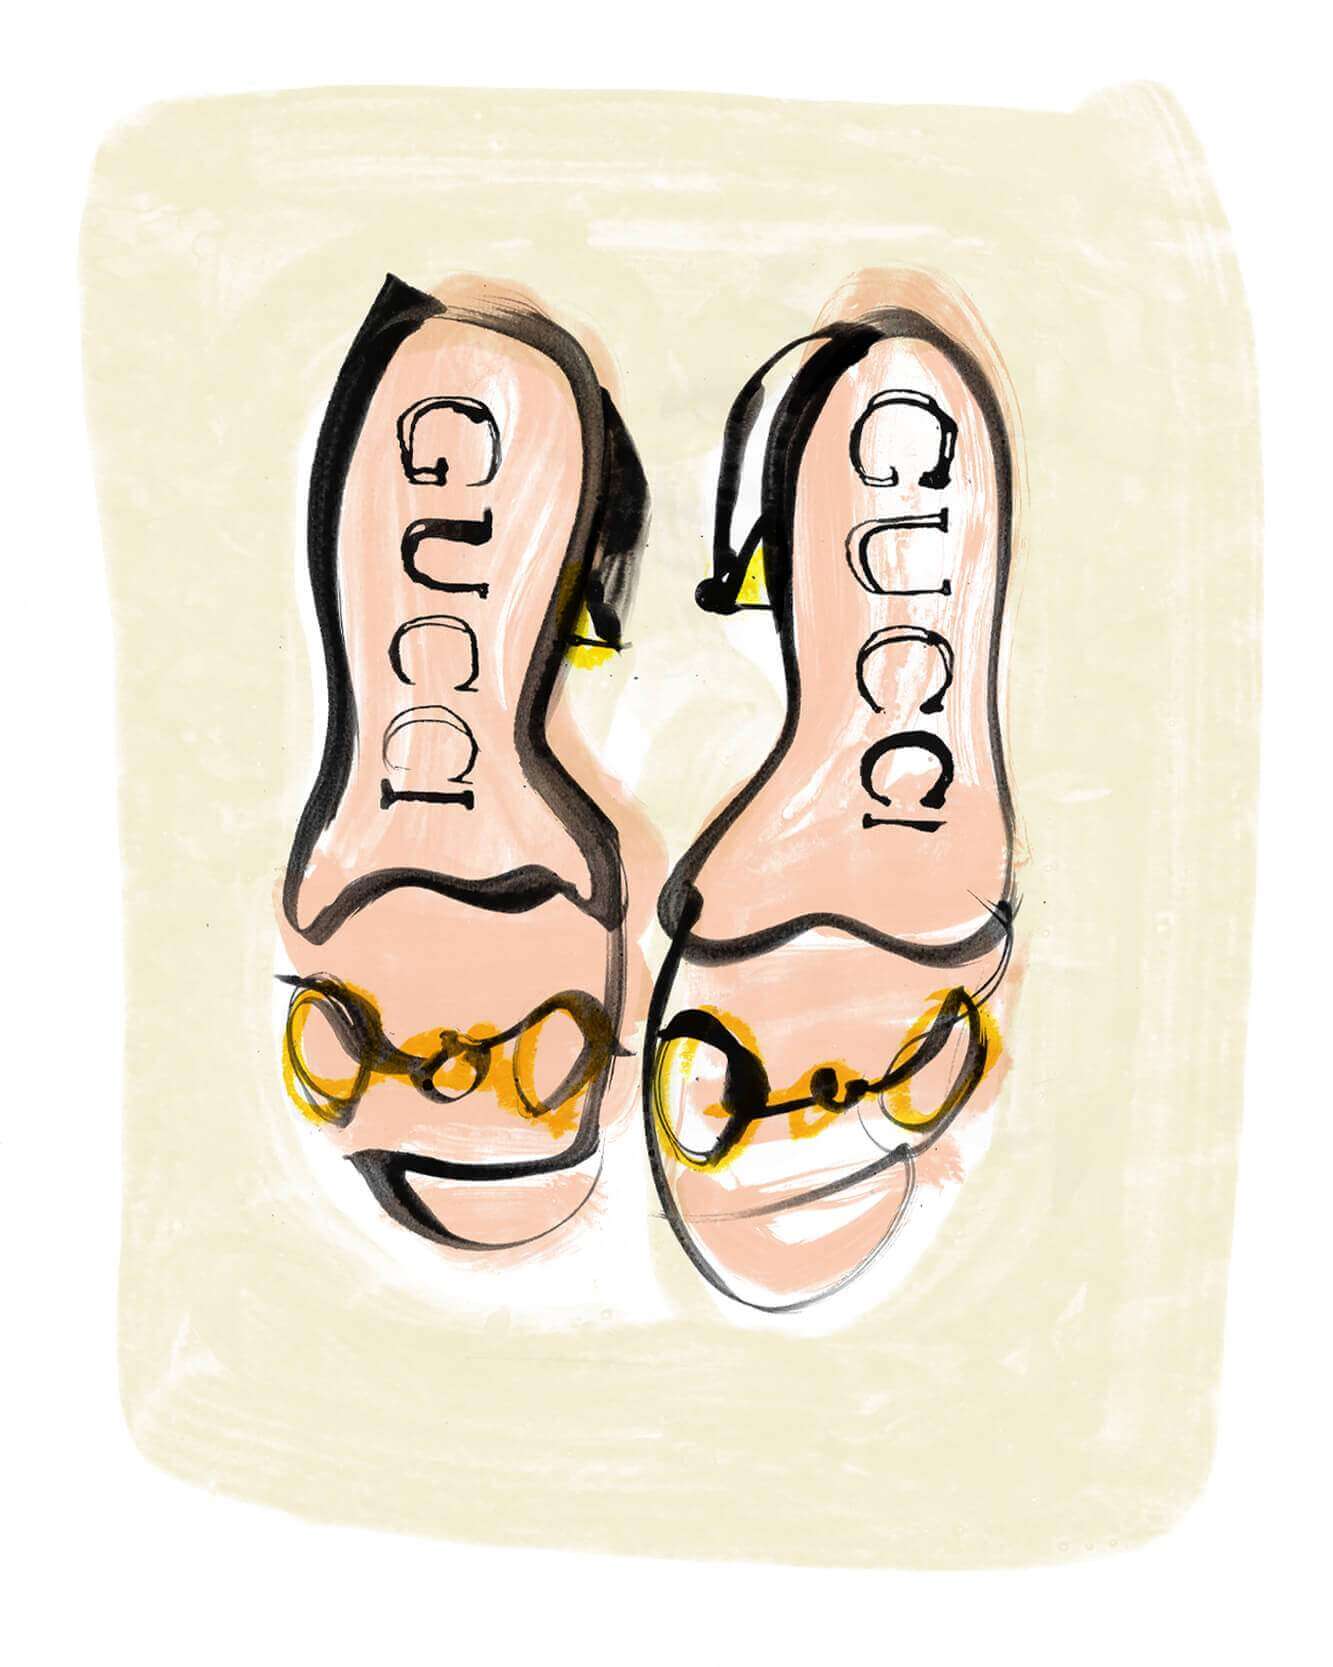 Fashion illustration of Gucci shoes. Ink illustration capturing the iconic Gucci mules. Fashion accessories illustrated.